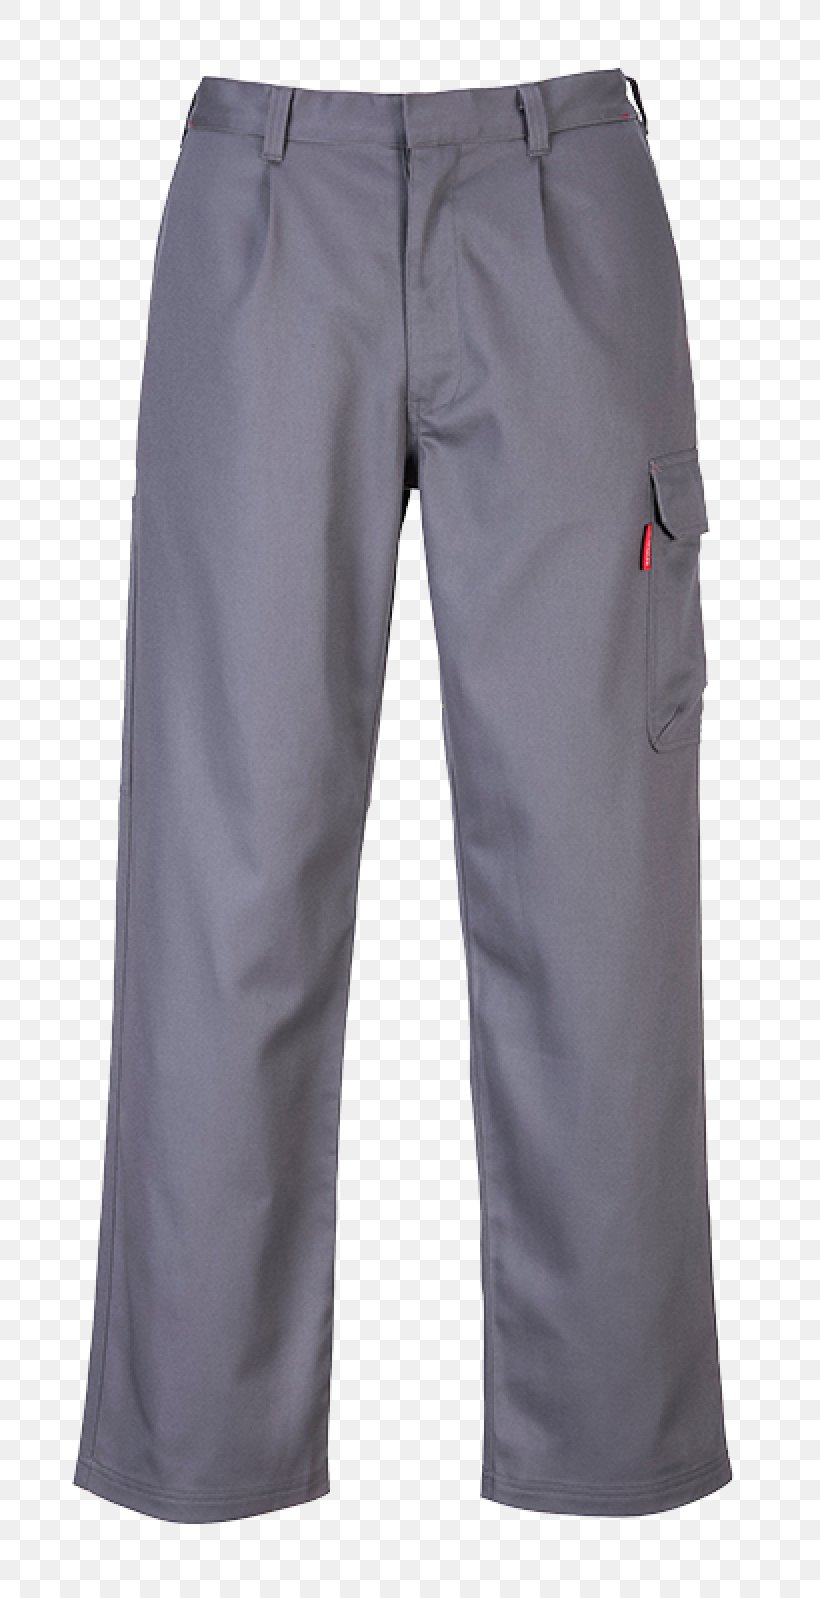 Clothing Welding Pants Fireproofing Flame Retardant, PNG, 800x1598px, Clothing, Active Pants, Active Shorts, Bermuda Shorts, Braces Download Free